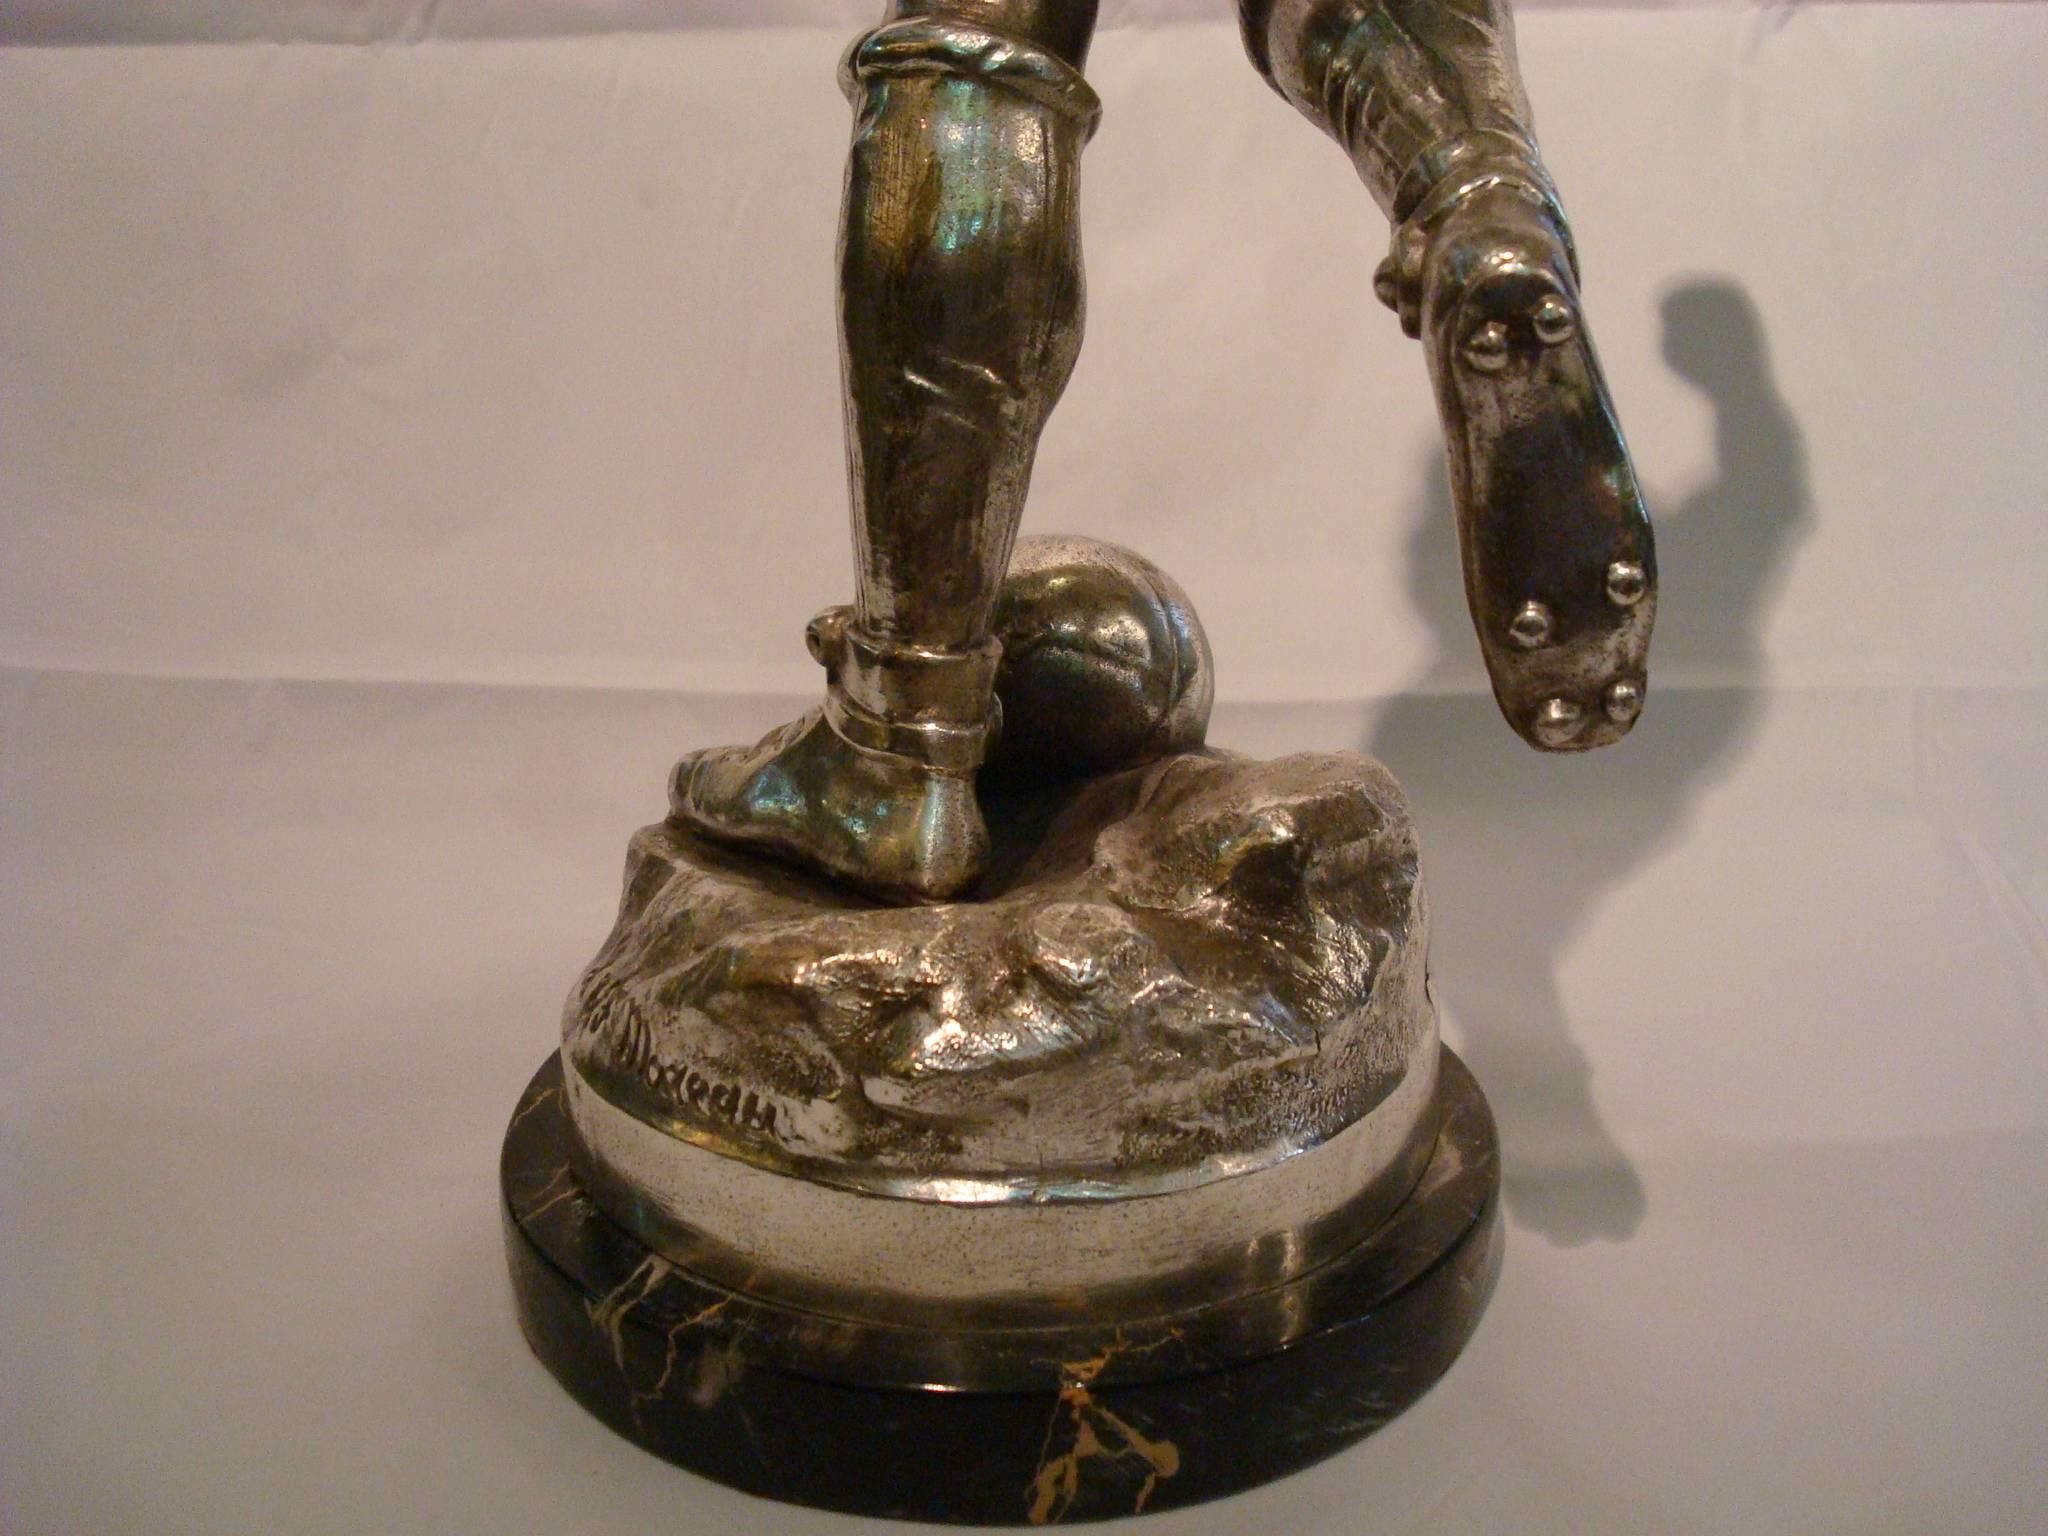 Silvered Soccer or Football player Figure, Sculpture or Trophy, France, 1920s